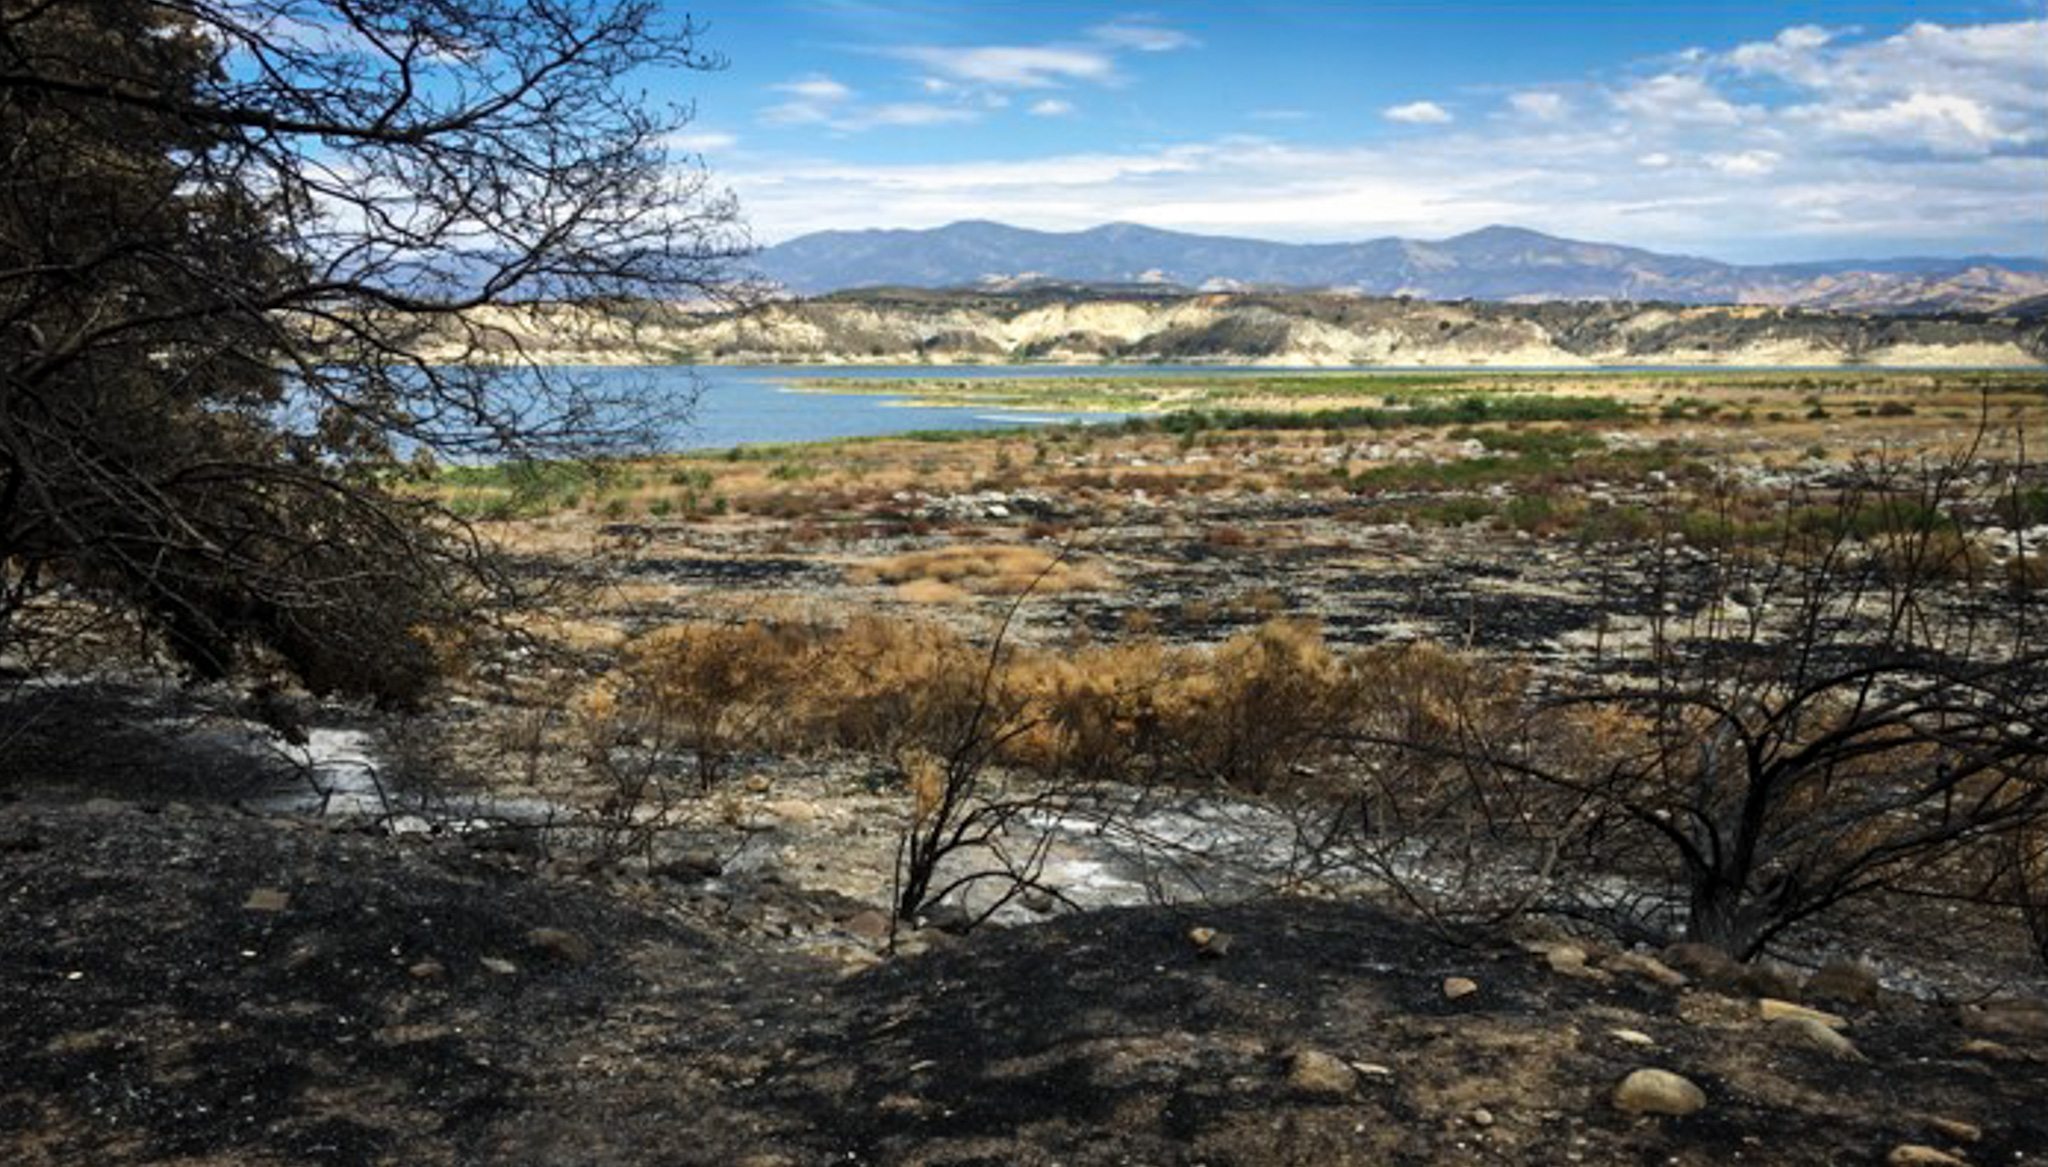 Land and trees scorched by the 2018 Carr Fire. Whiskeytown Reservoir can be seen in the distance. Photo courtesy of Reclamation’s California-Great Basin Regional Office.